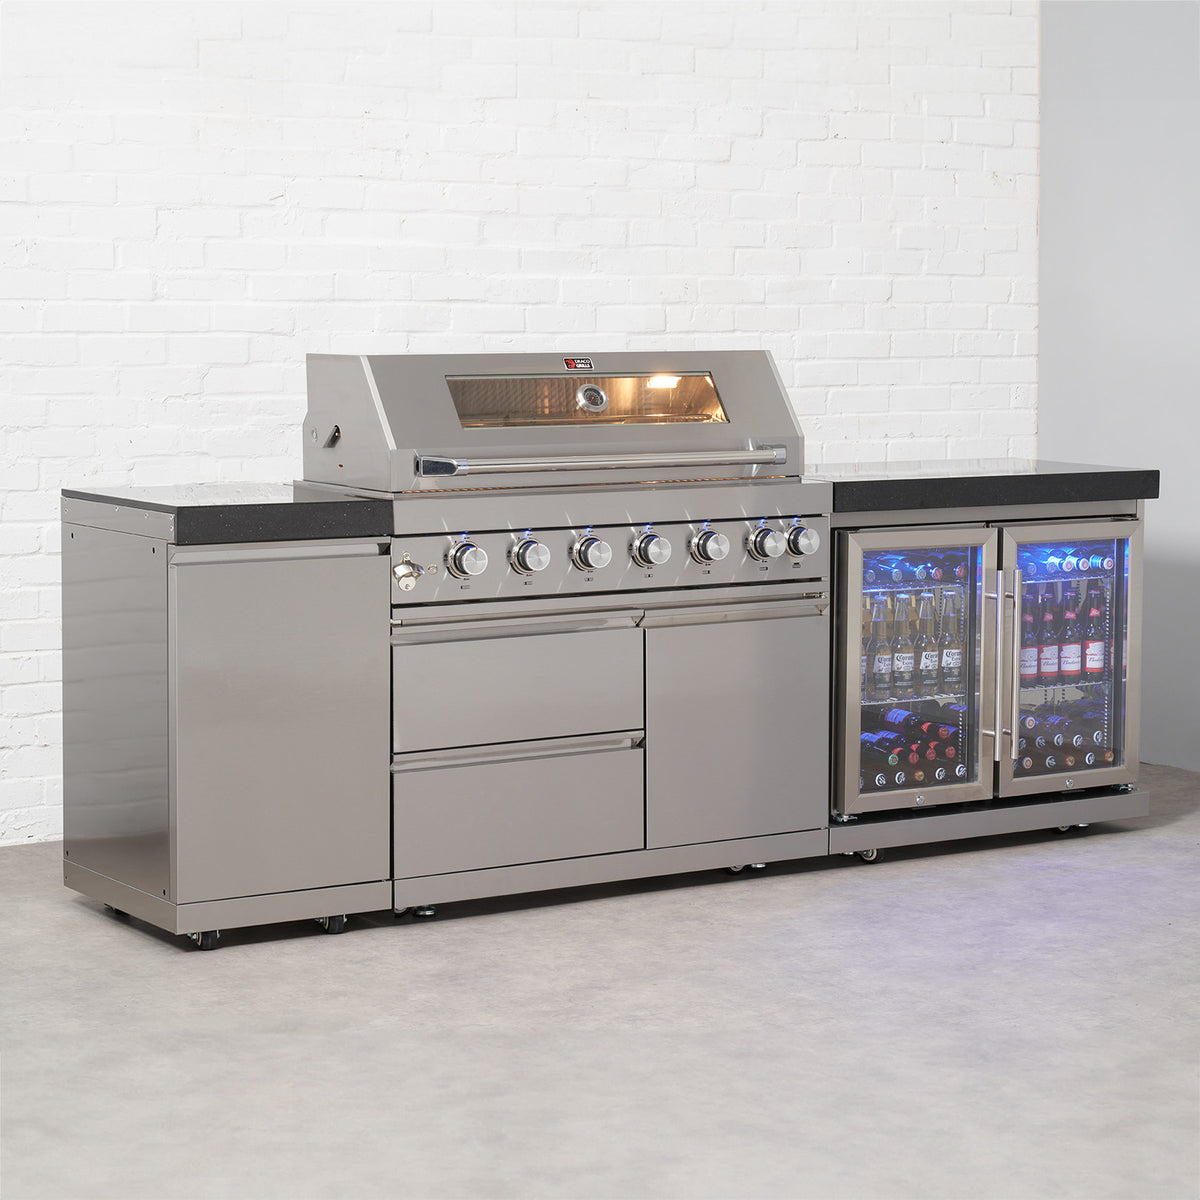 Draco Grills 6 Burner BBQ Modular Outdoor Kitchen with Single Cupboard and Double Fridge Unit